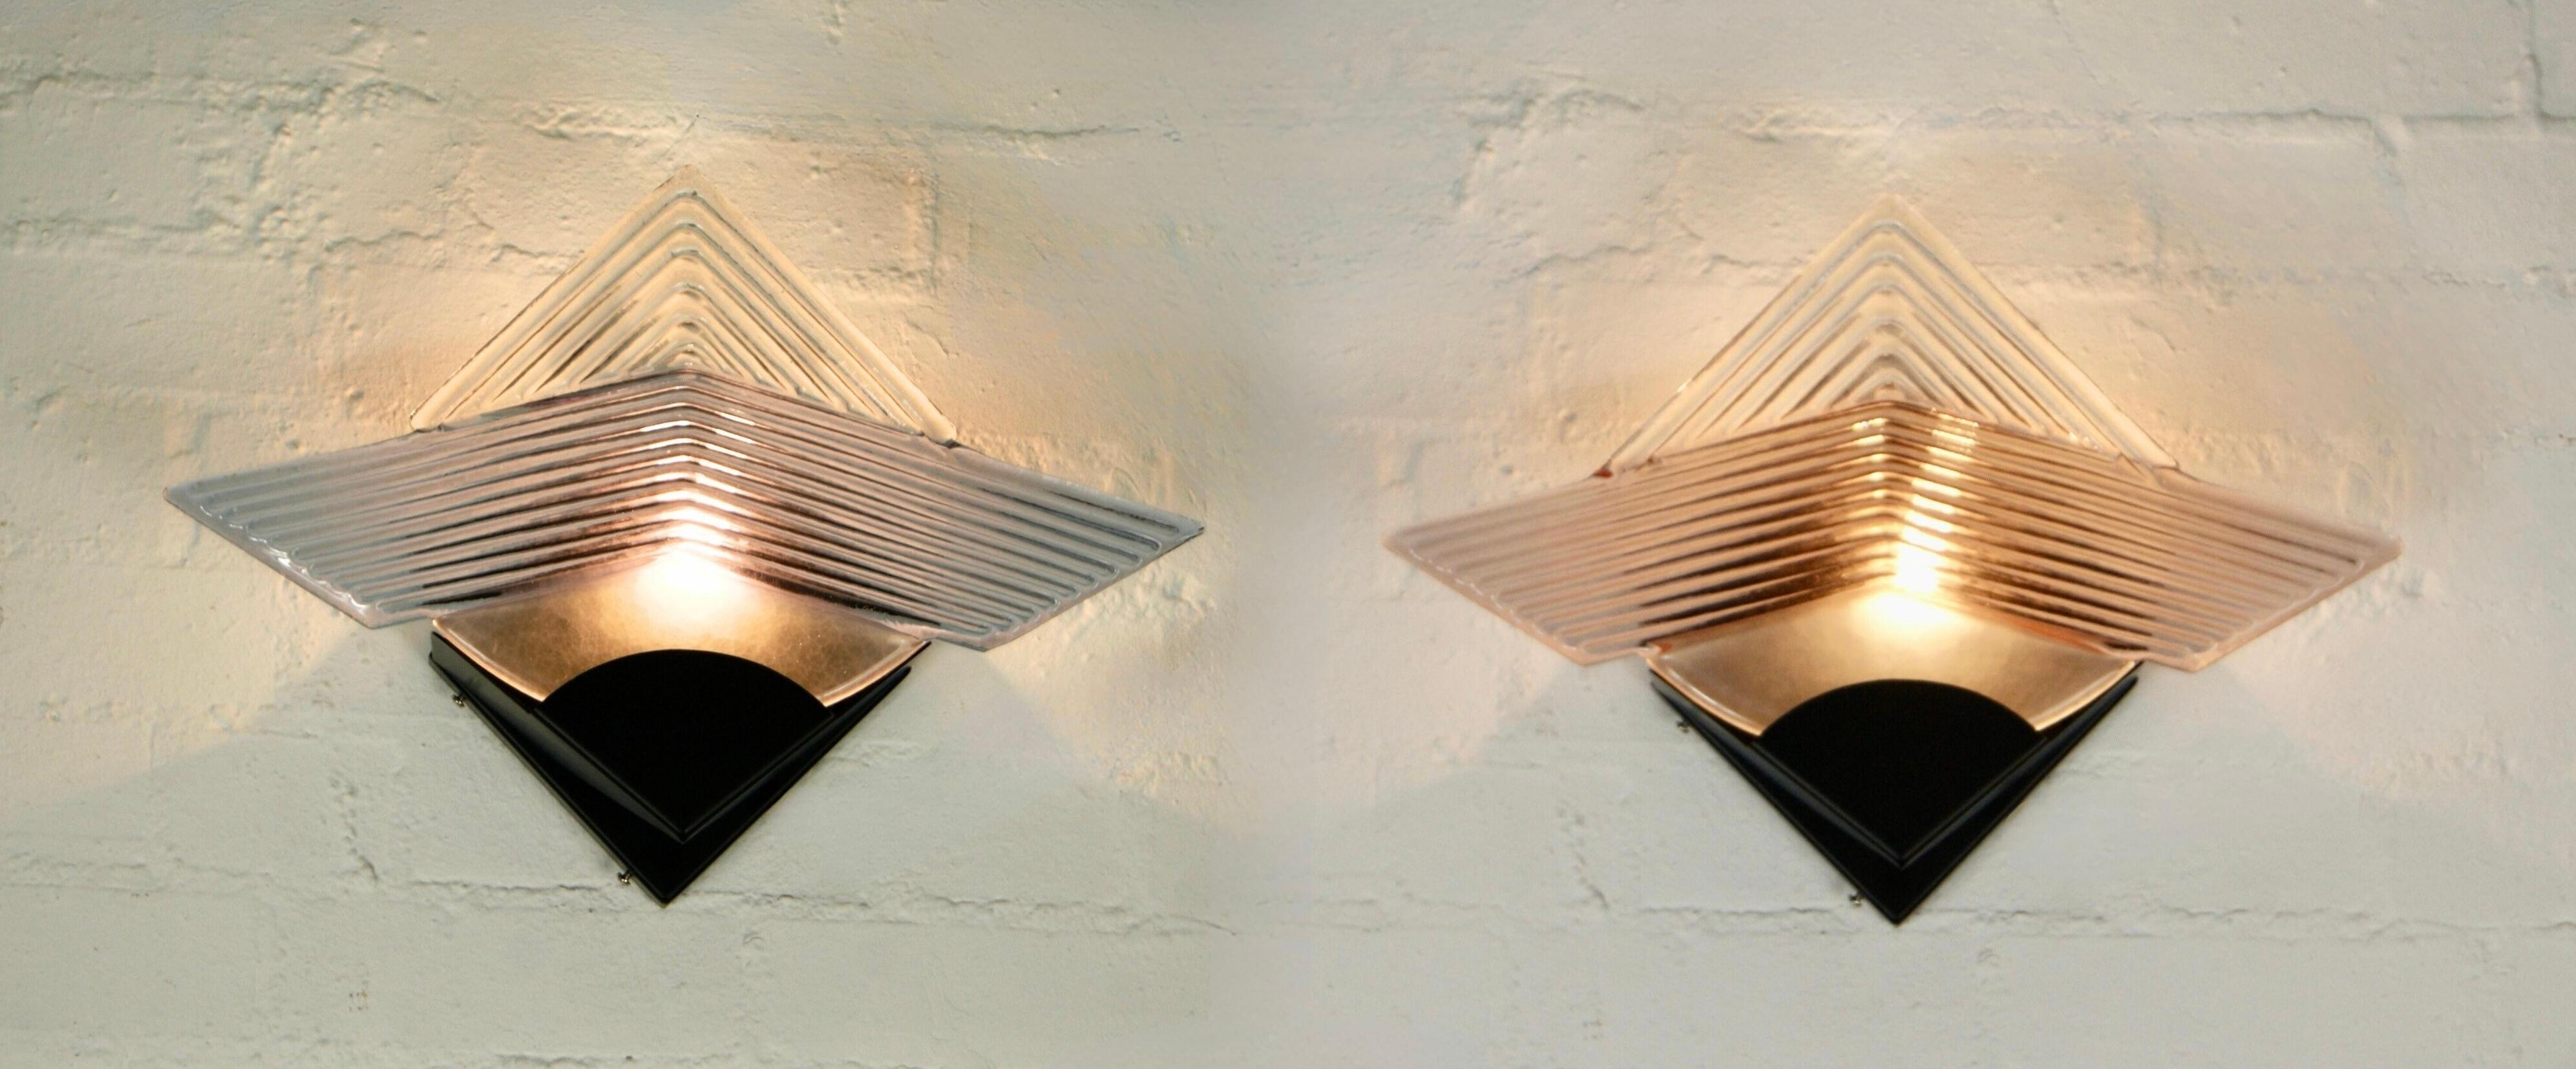 FREDERICO DI MAJO Set of 2 Post-Modern Murano Glass Wall Sconces Large 1970s For Sale 4